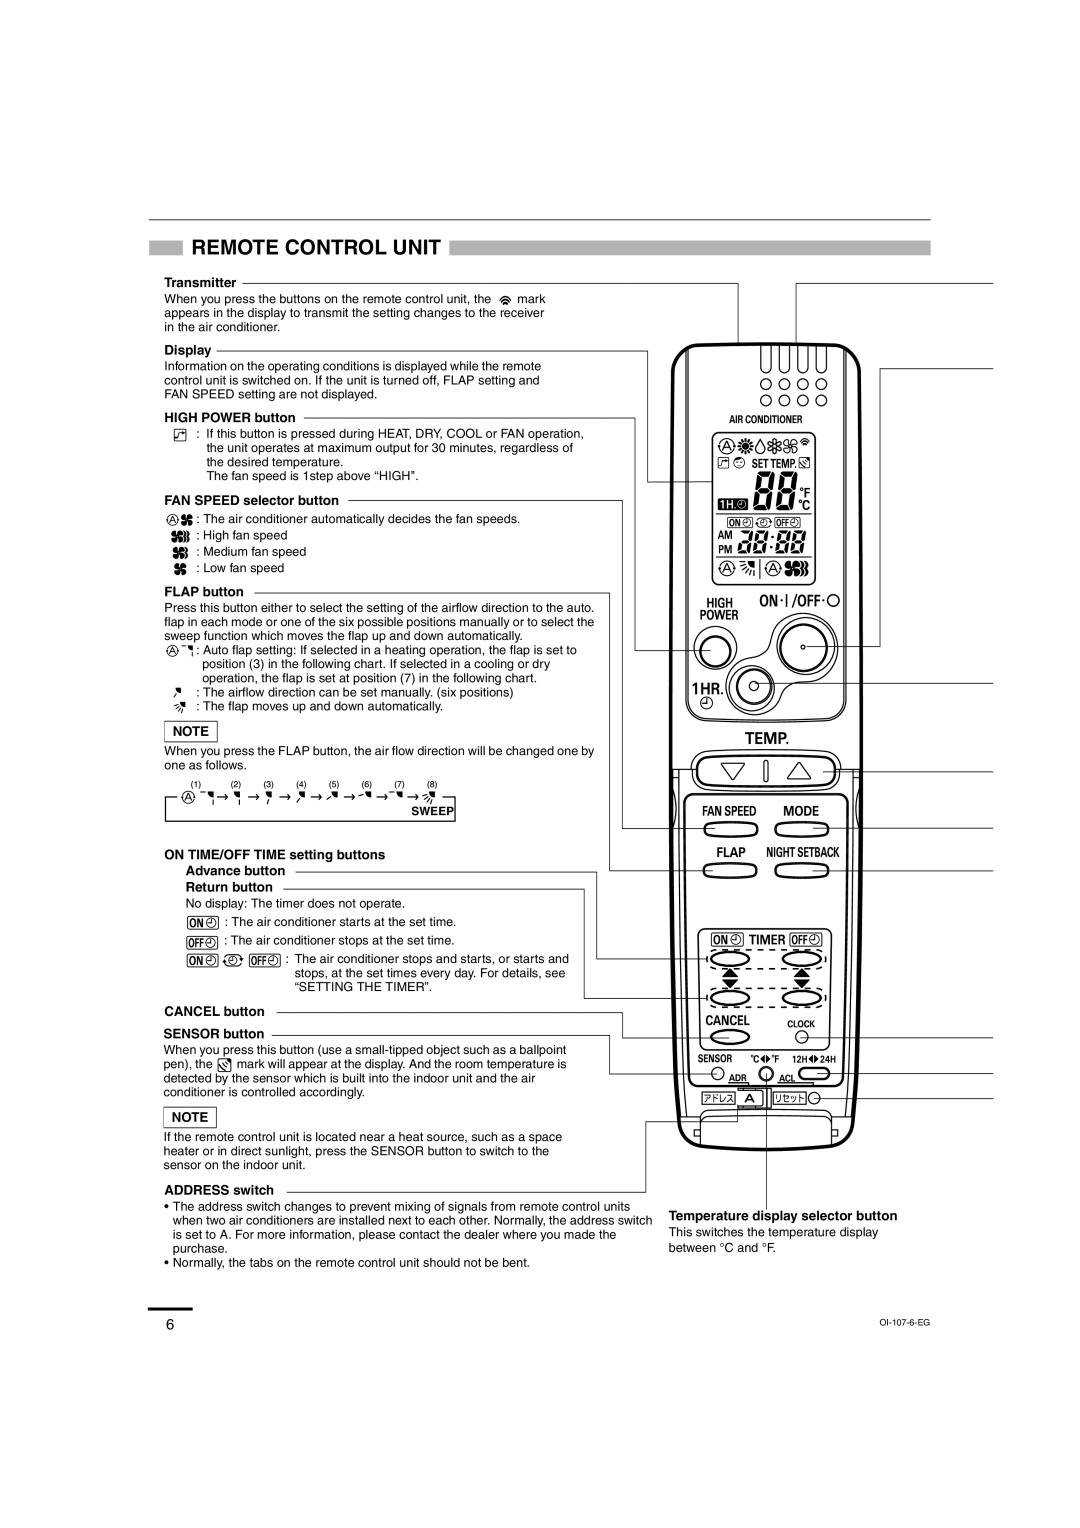 Sanyo XMHS0972 Remote Control Unit, Transmitter, Display, HIGH POWER button, FAN SPEED selector button, FLAP button 